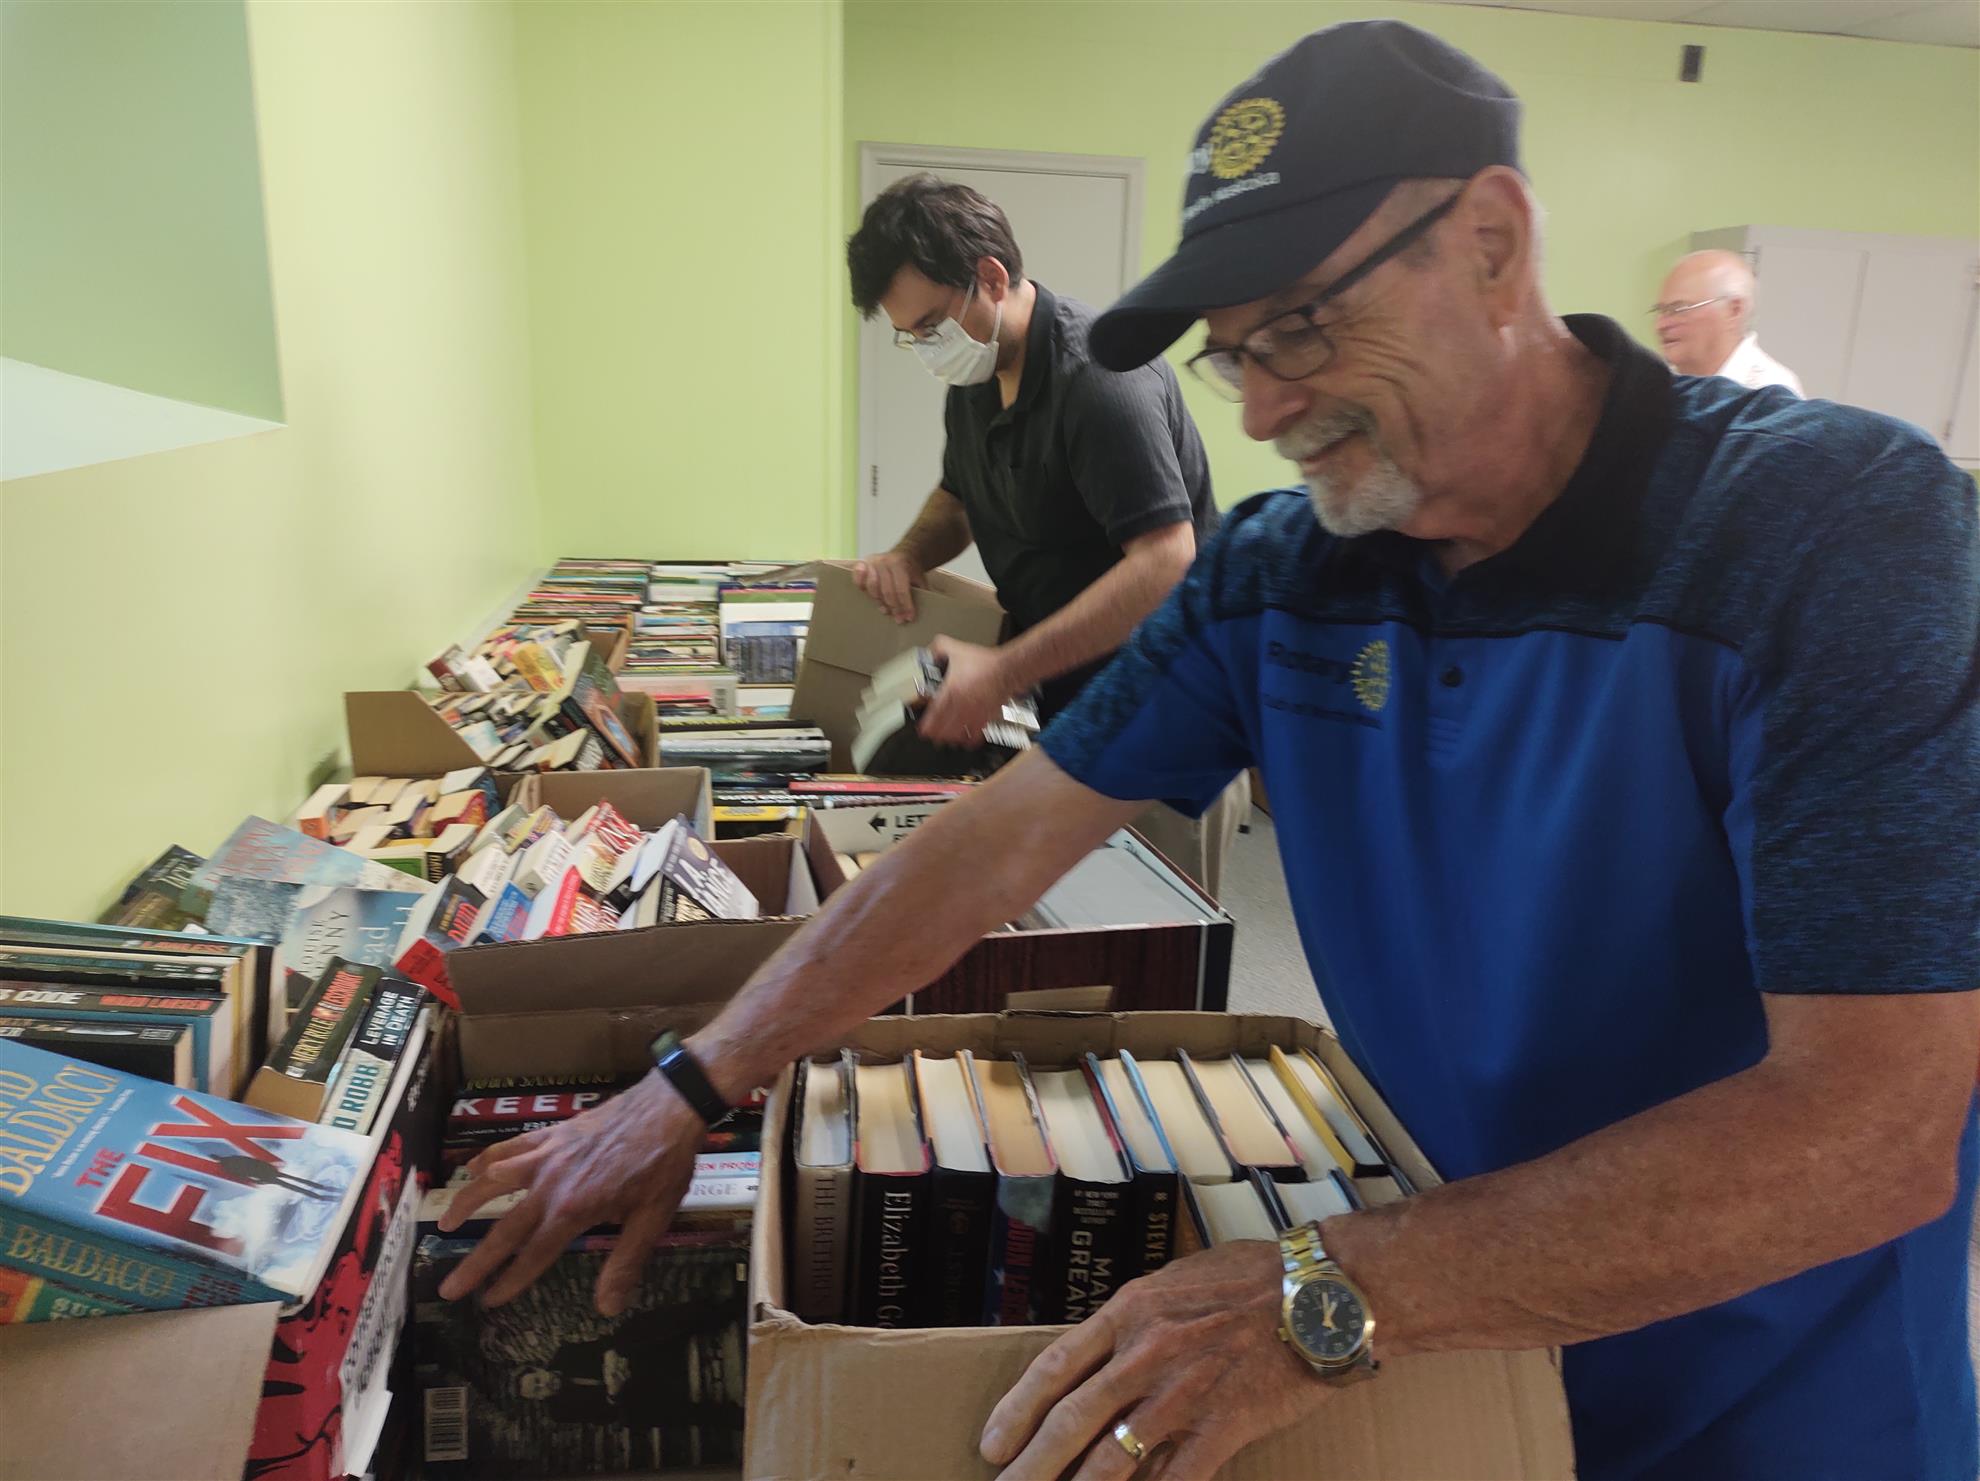 2 Rotarians sort a large table of books.